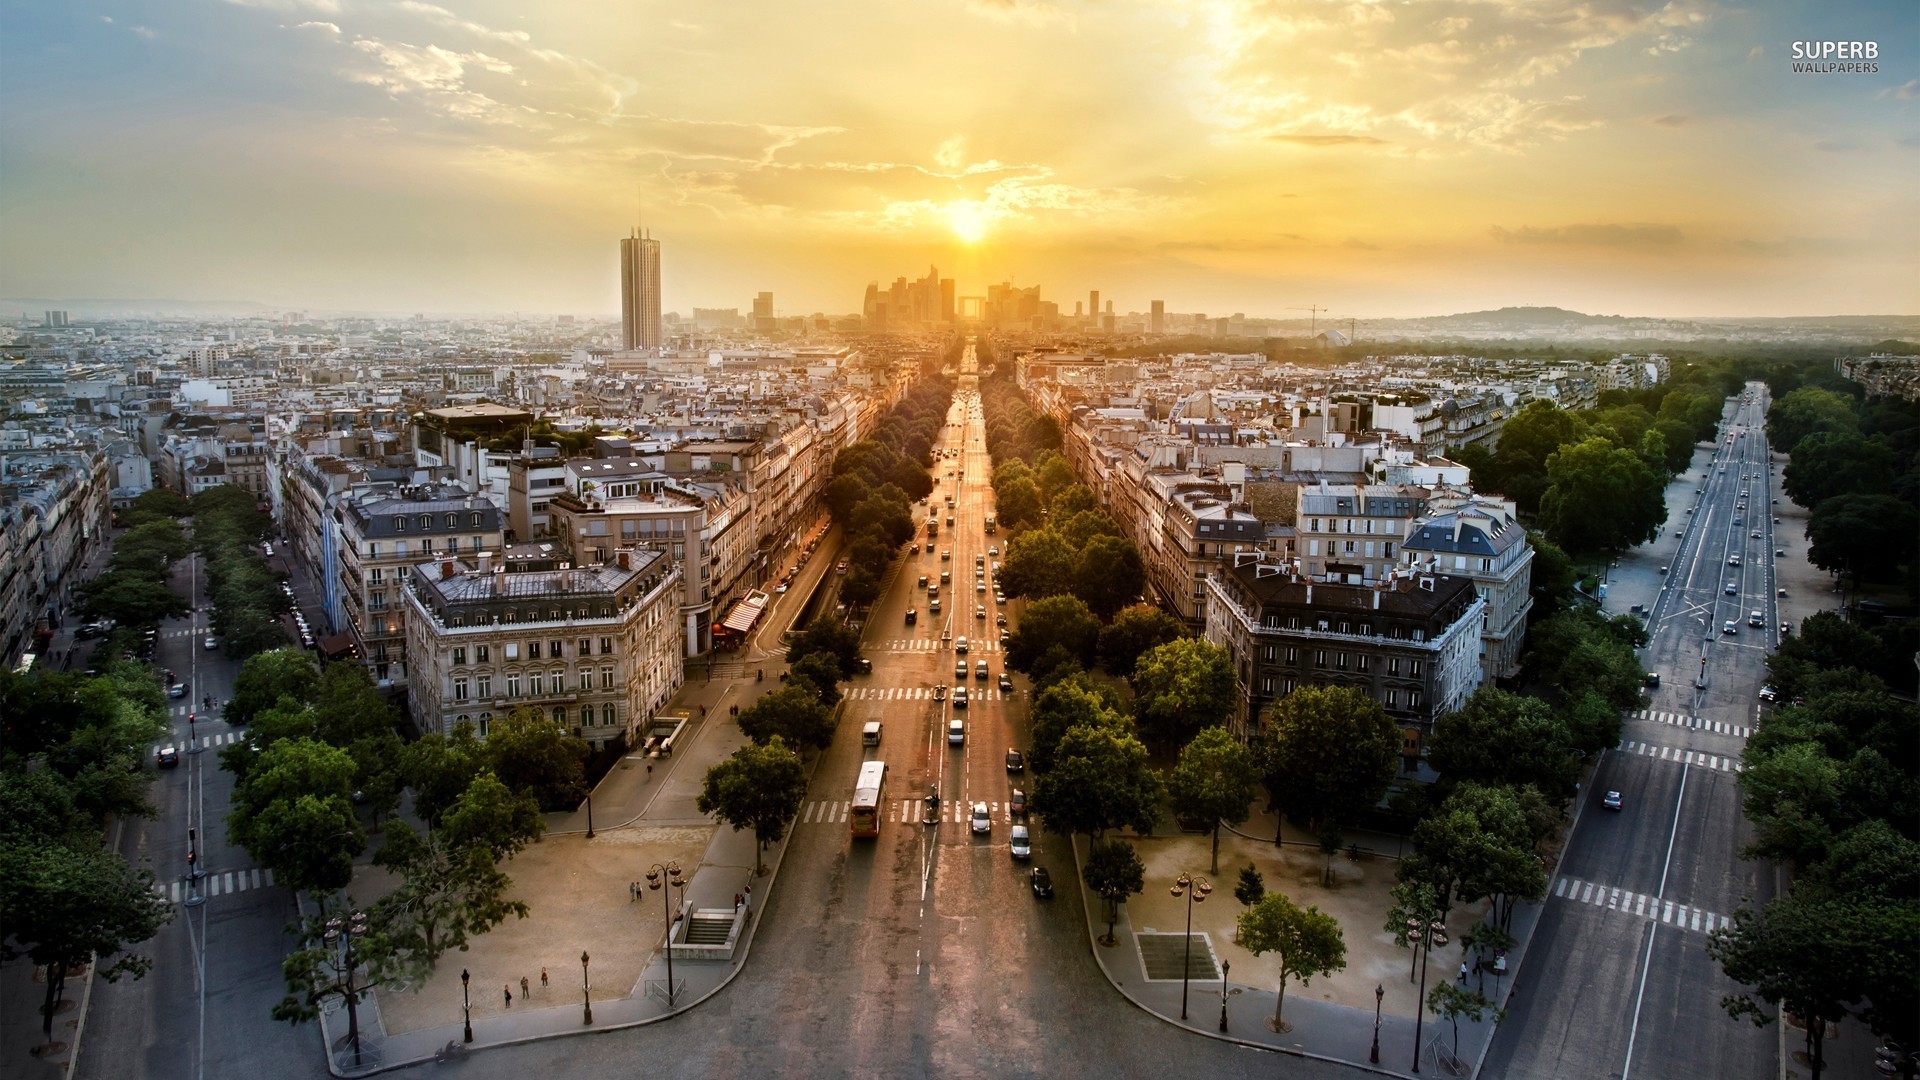 HD Paris Background The City Of Lights And Romance